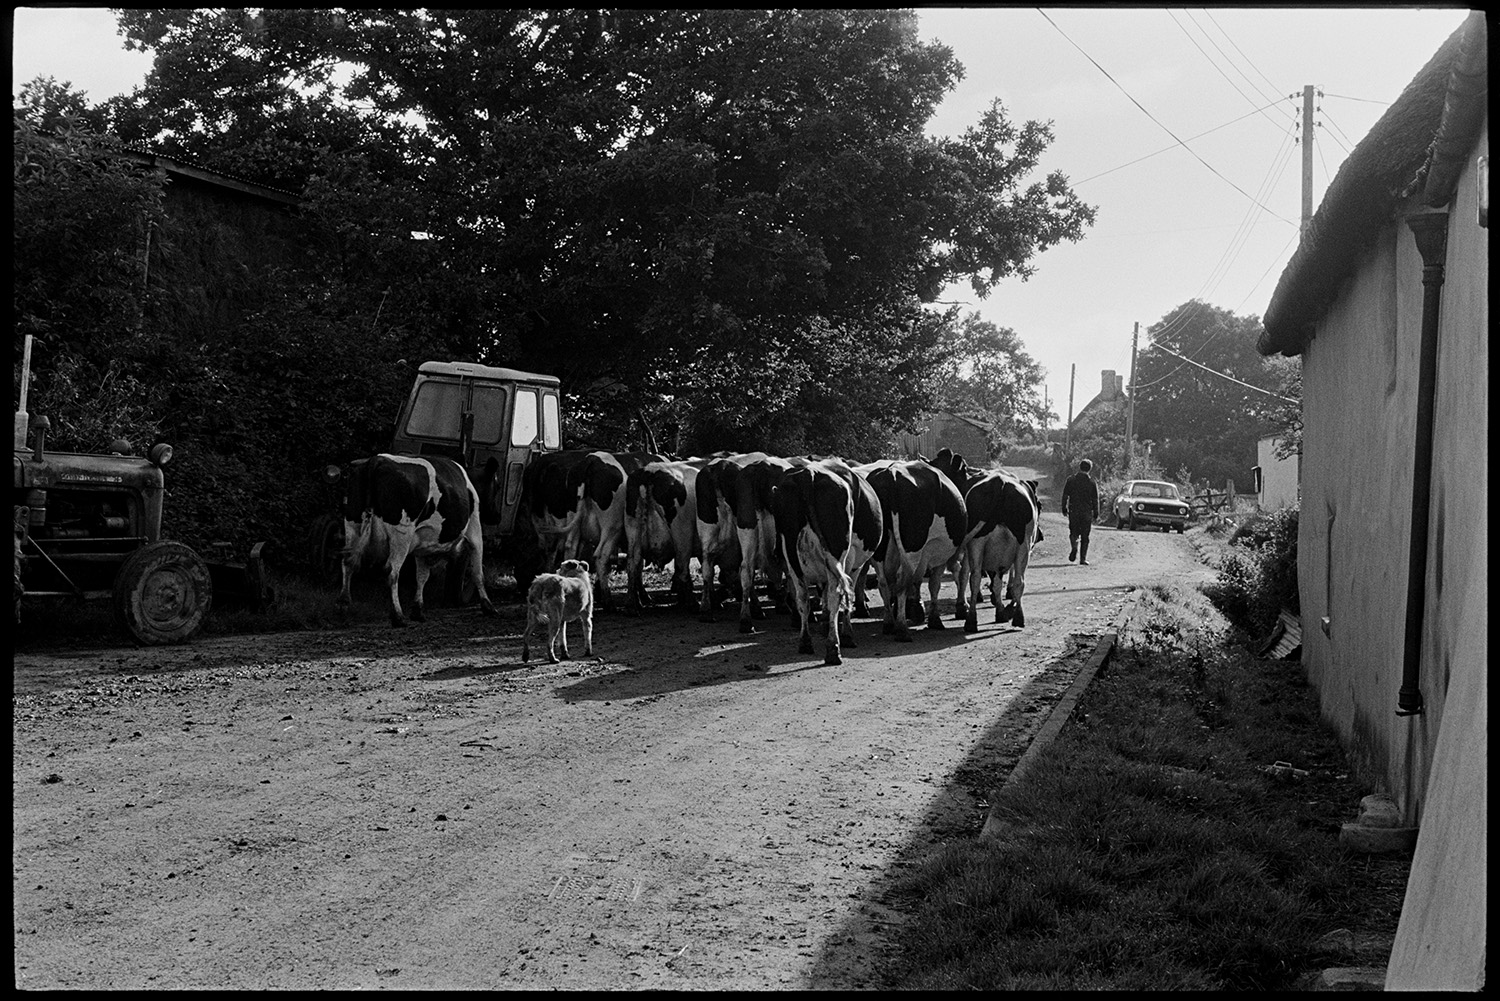 Milking herd of cows going through village.
[Peter Jones leading a herd of milking cows with a dog up a road at Upcott, near Dolton. Thatched cottages and a parked car are on one side of the road, with two tractors parked in the shade of a hedge and oak trees, on the other.]